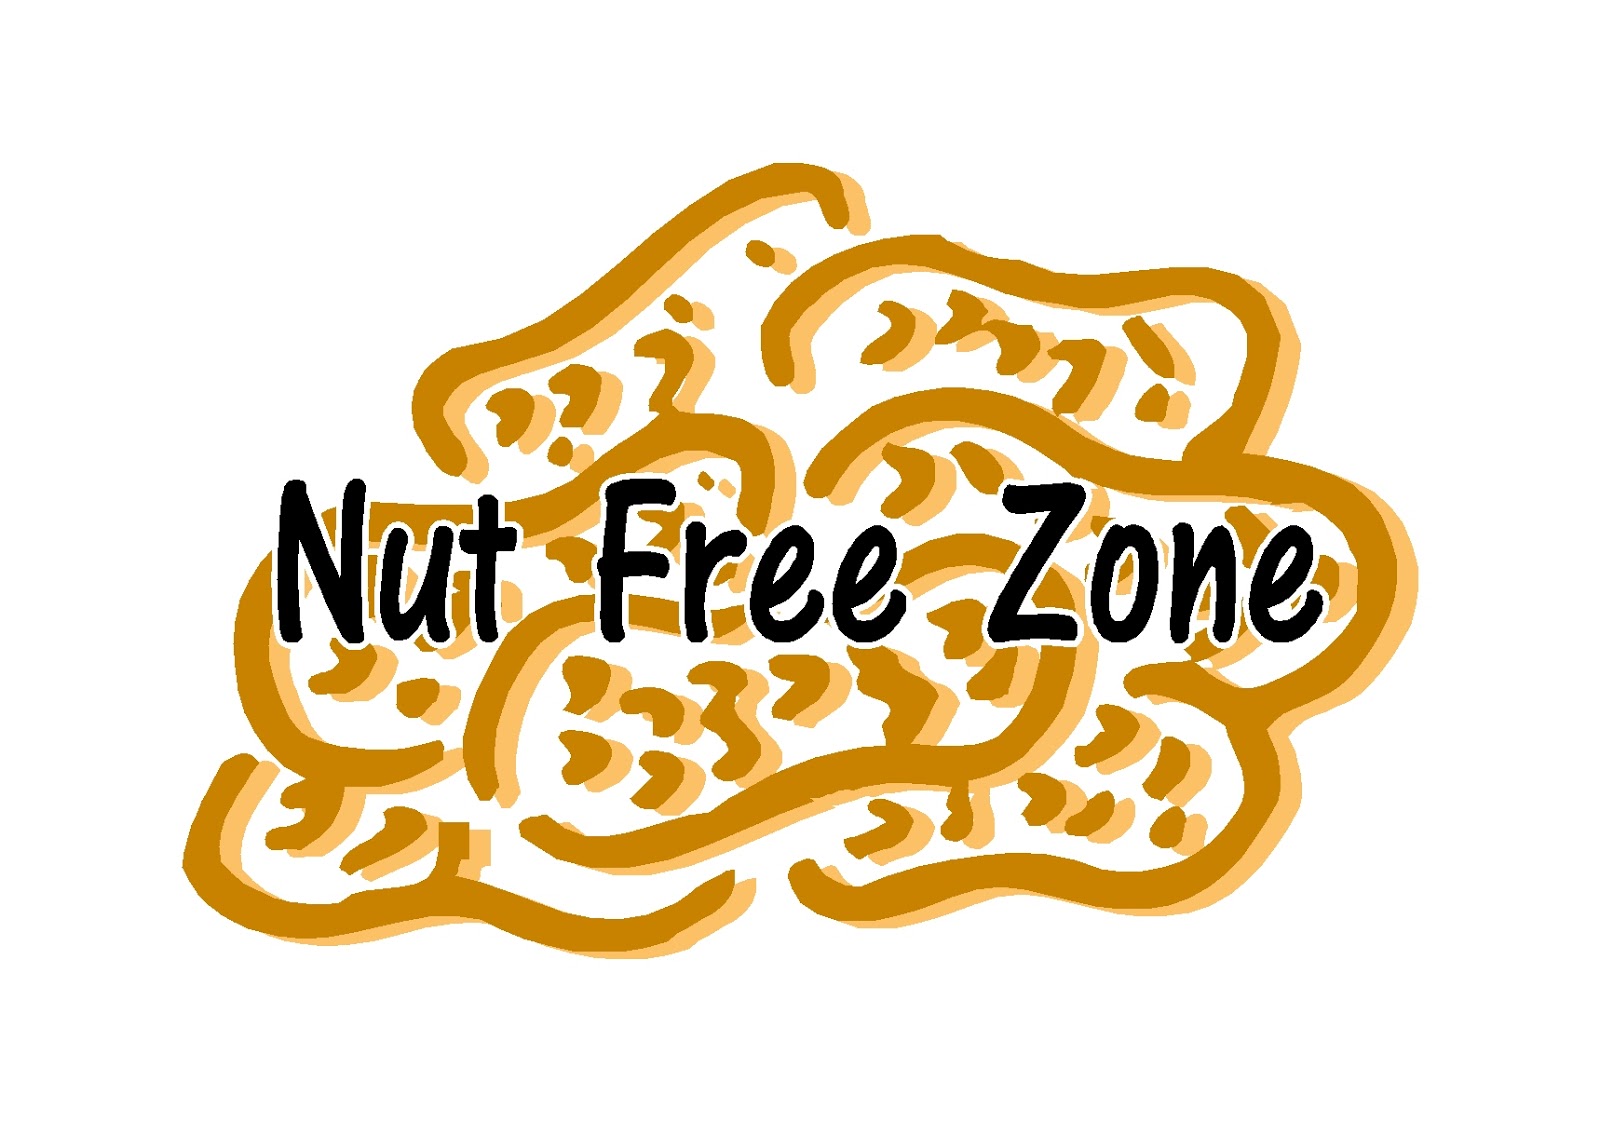 peanut-allergy-sign-you-are-entering-a-nut-free-zone